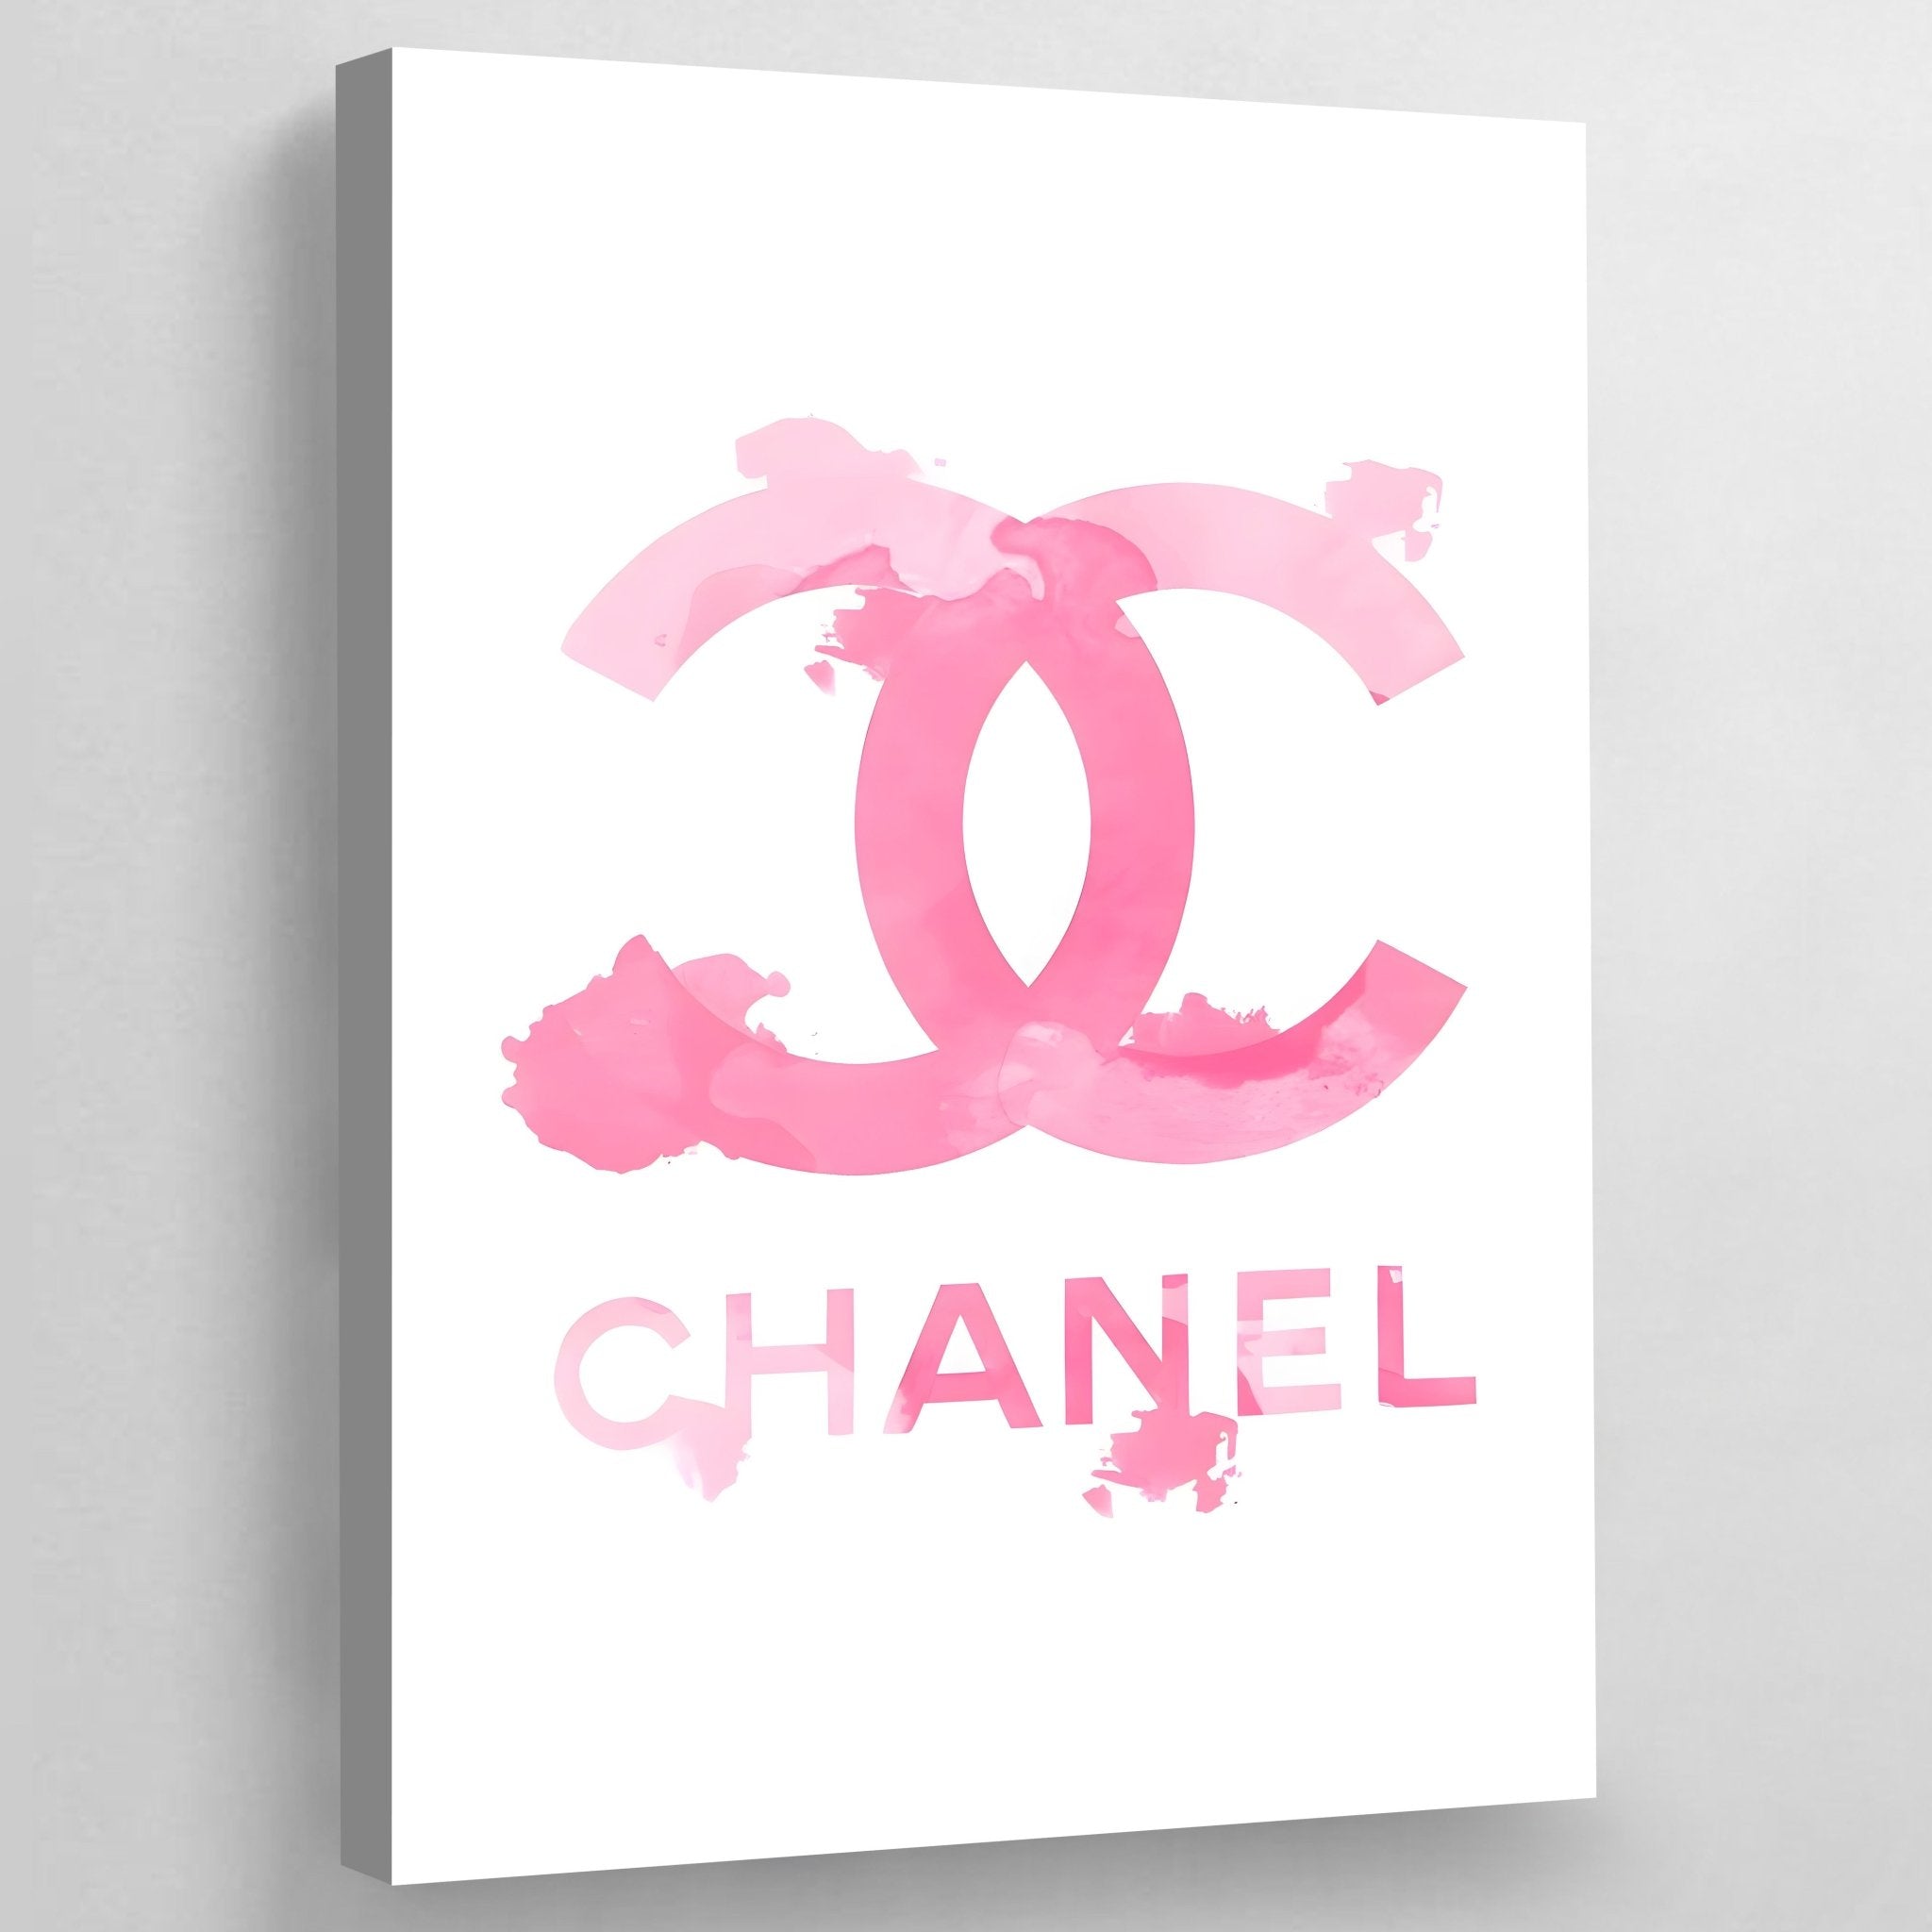 Framed Canvas Art (Champagne) - Chanel Coco Pink by Sonia Stella ( Fashion > Hair & Beauty > Perfume Bottles art) - 26x18 in